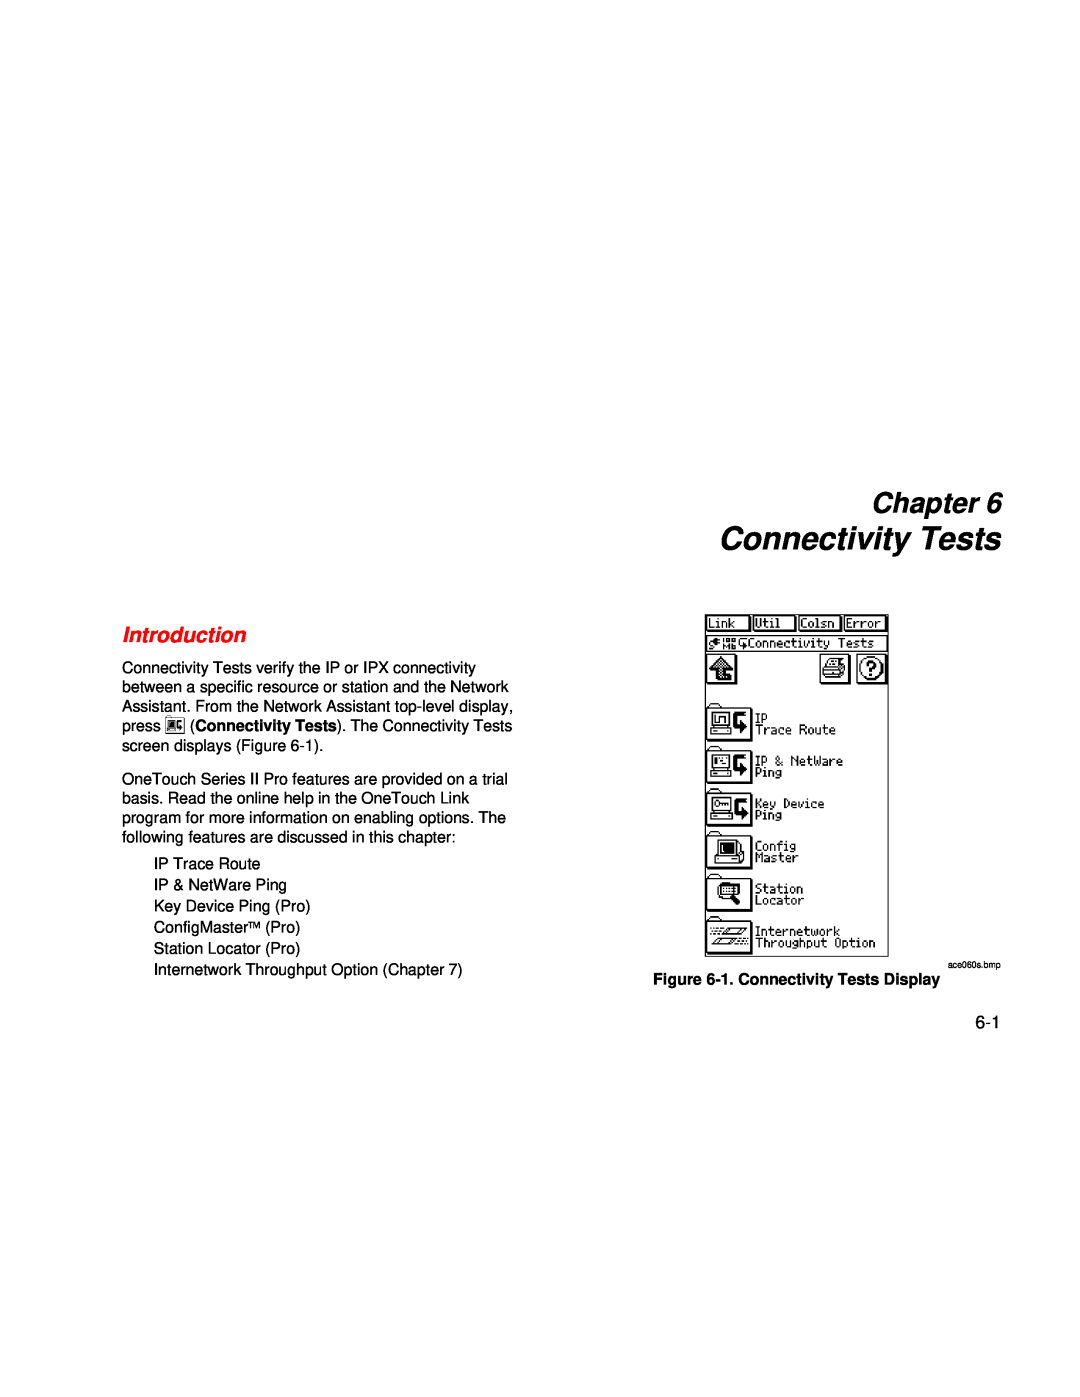 Fluke Series II user manual Chapter, Introduction, 1. Connectivity Tests Display 